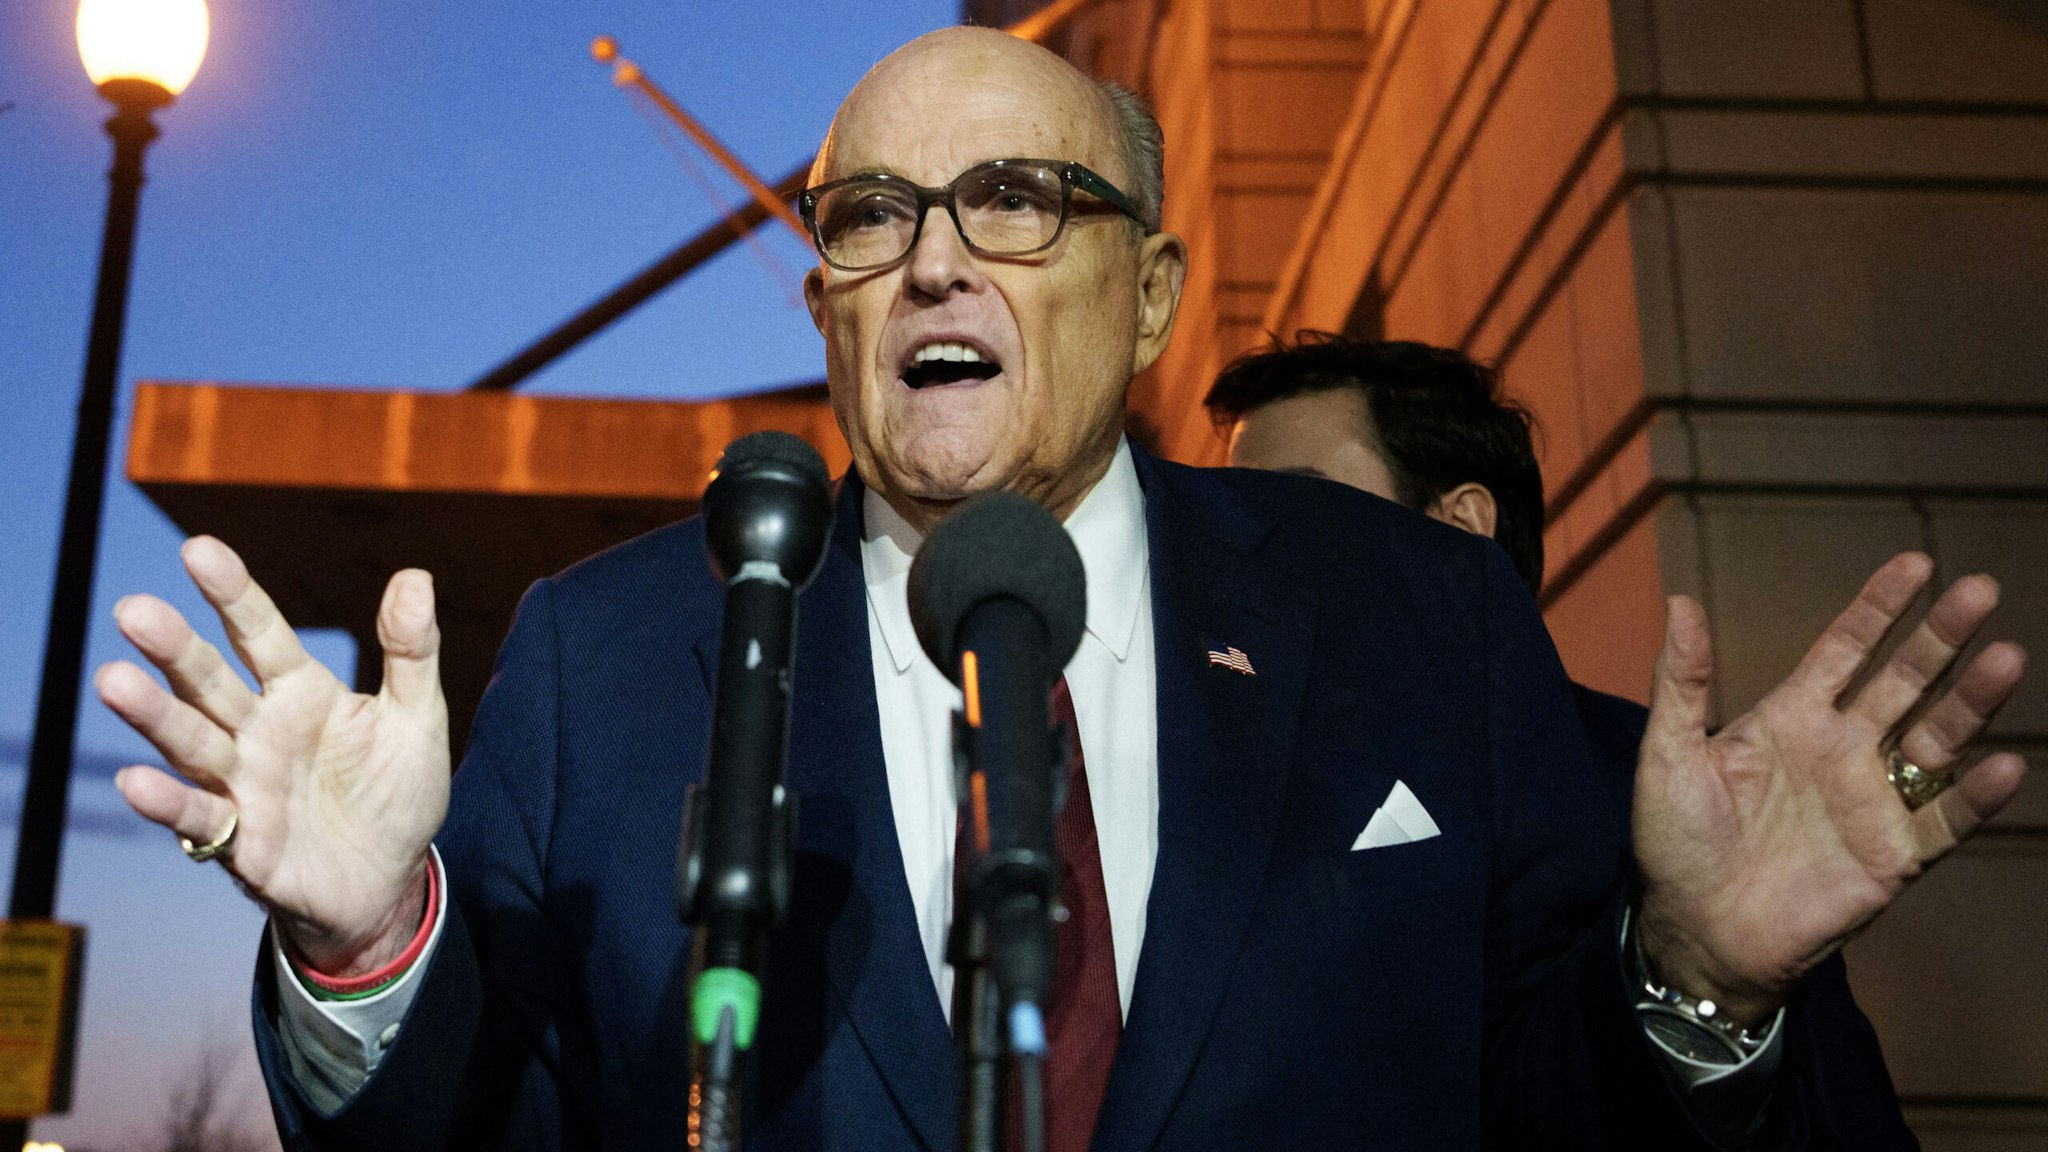 WASHINGTON, DC - DECEMBER 11: Rudy Giuliani, the former personal lawyer for former U.S. President Donald Trump, speaks to the press as he leaves the E. Barrett Prettyman U.S. District Courthouse on December 11, 2023 in Washington, DC. Jury selection and opening arguments started today in his defamation jury trial brought by Fulton County election workers Ruby Freeman and Shaye Moss, who successfully sued Giuliani in civil court.